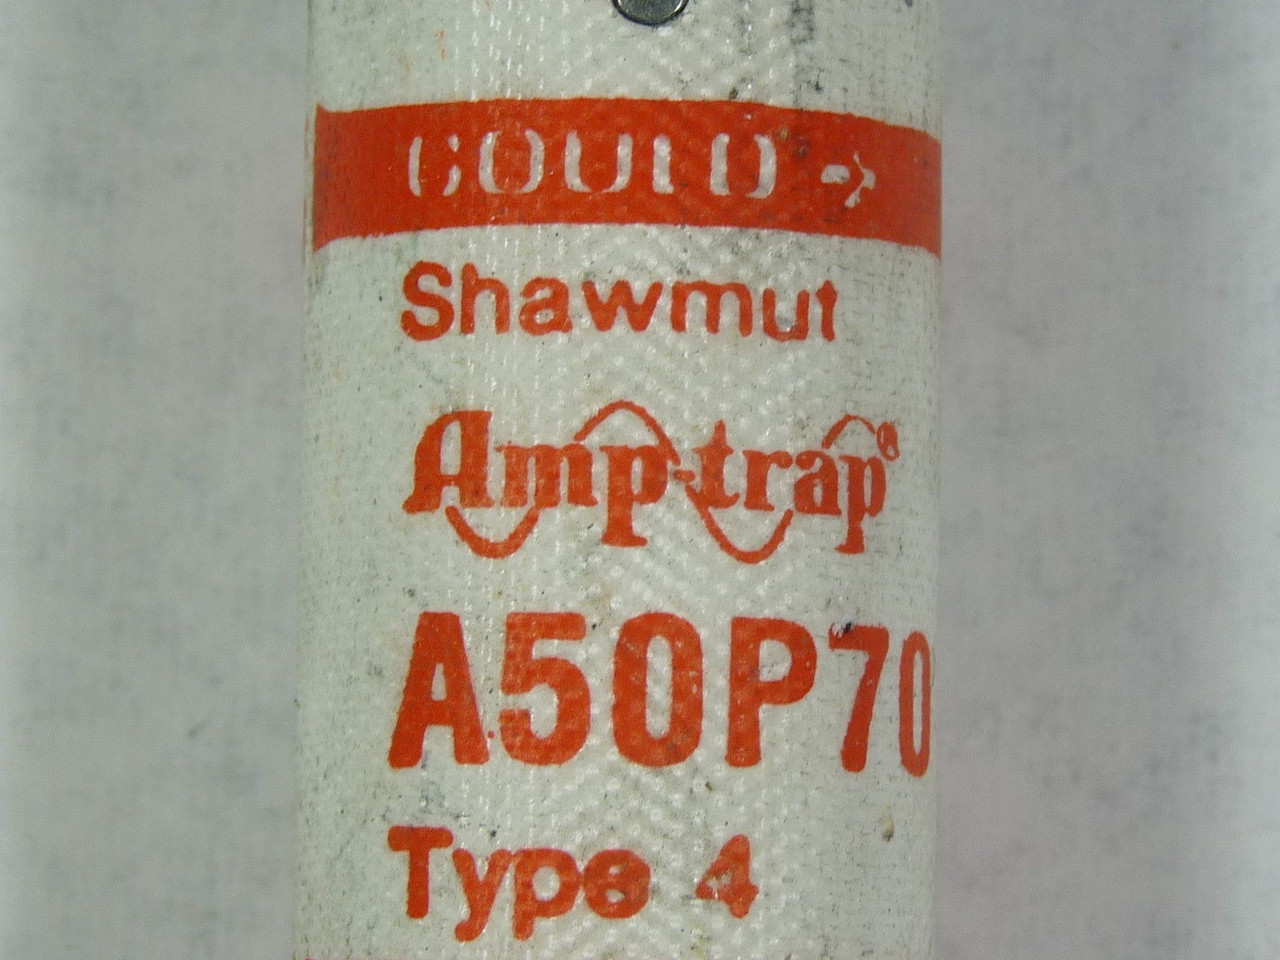 Gould A50P70 Fuse 70 Amp 500 VAC USED